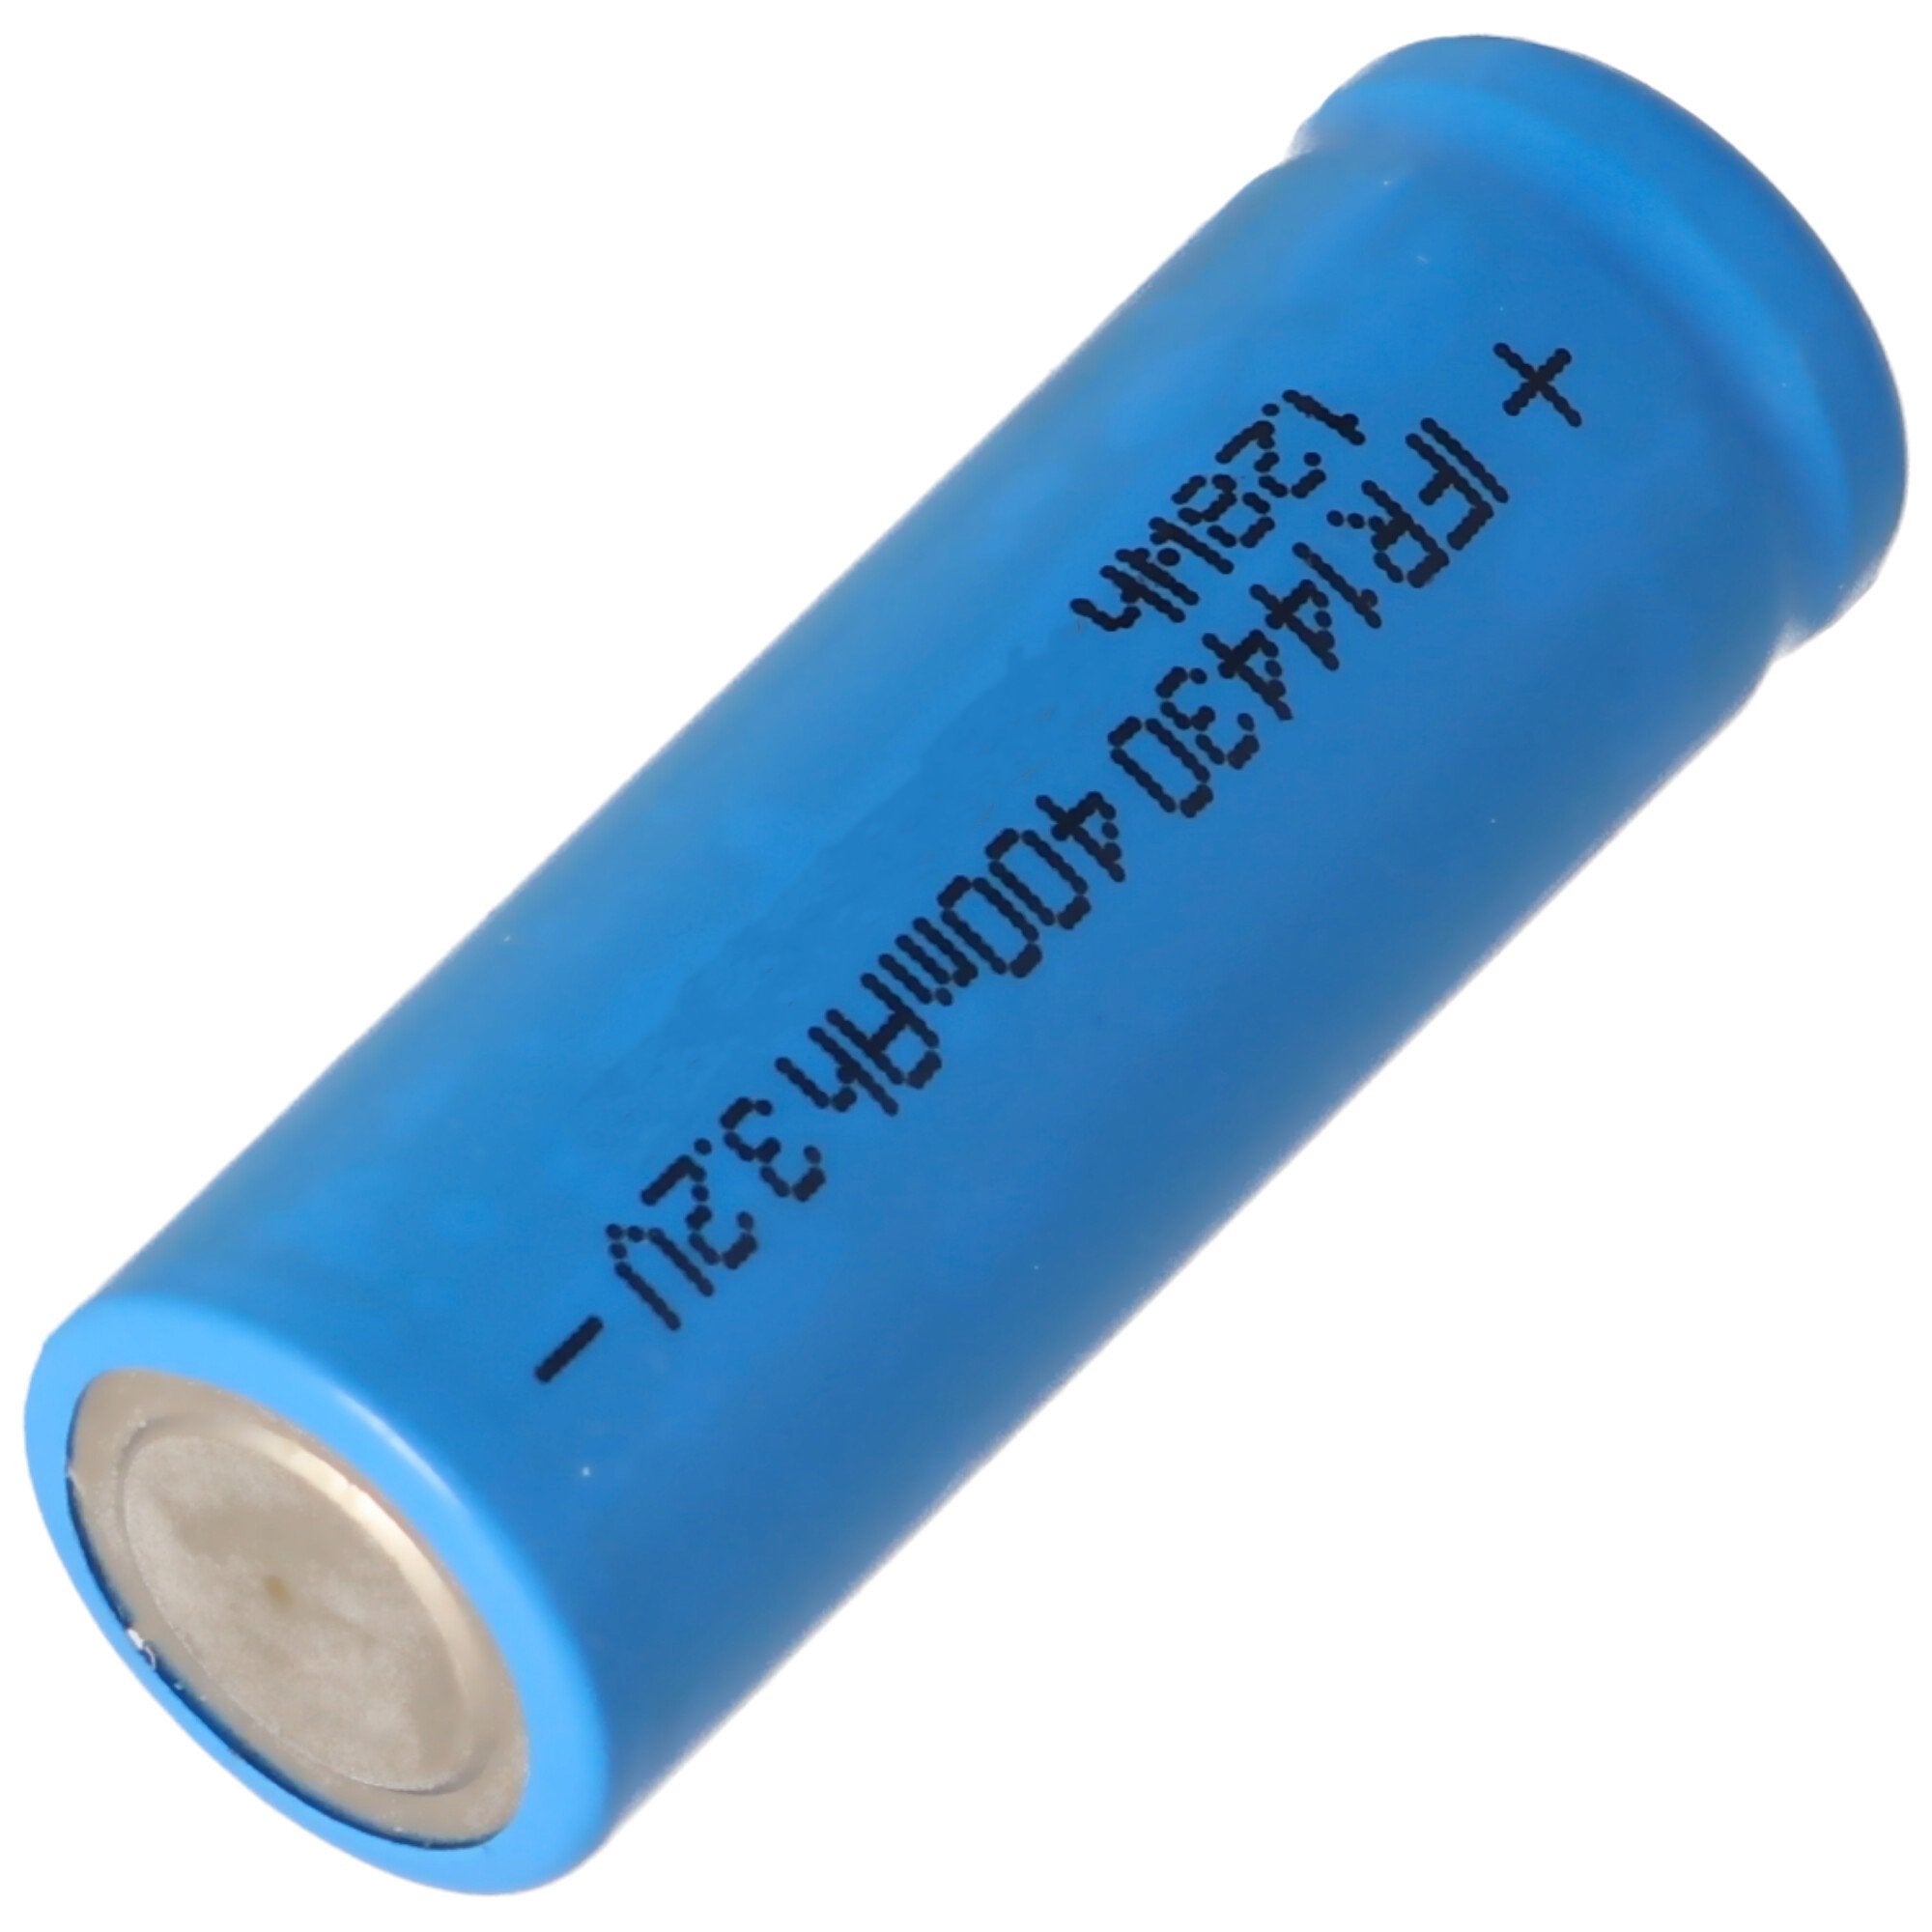 IFR 14430 - 400mAh 3.2V LiFePo4 battery (button top) unprotected